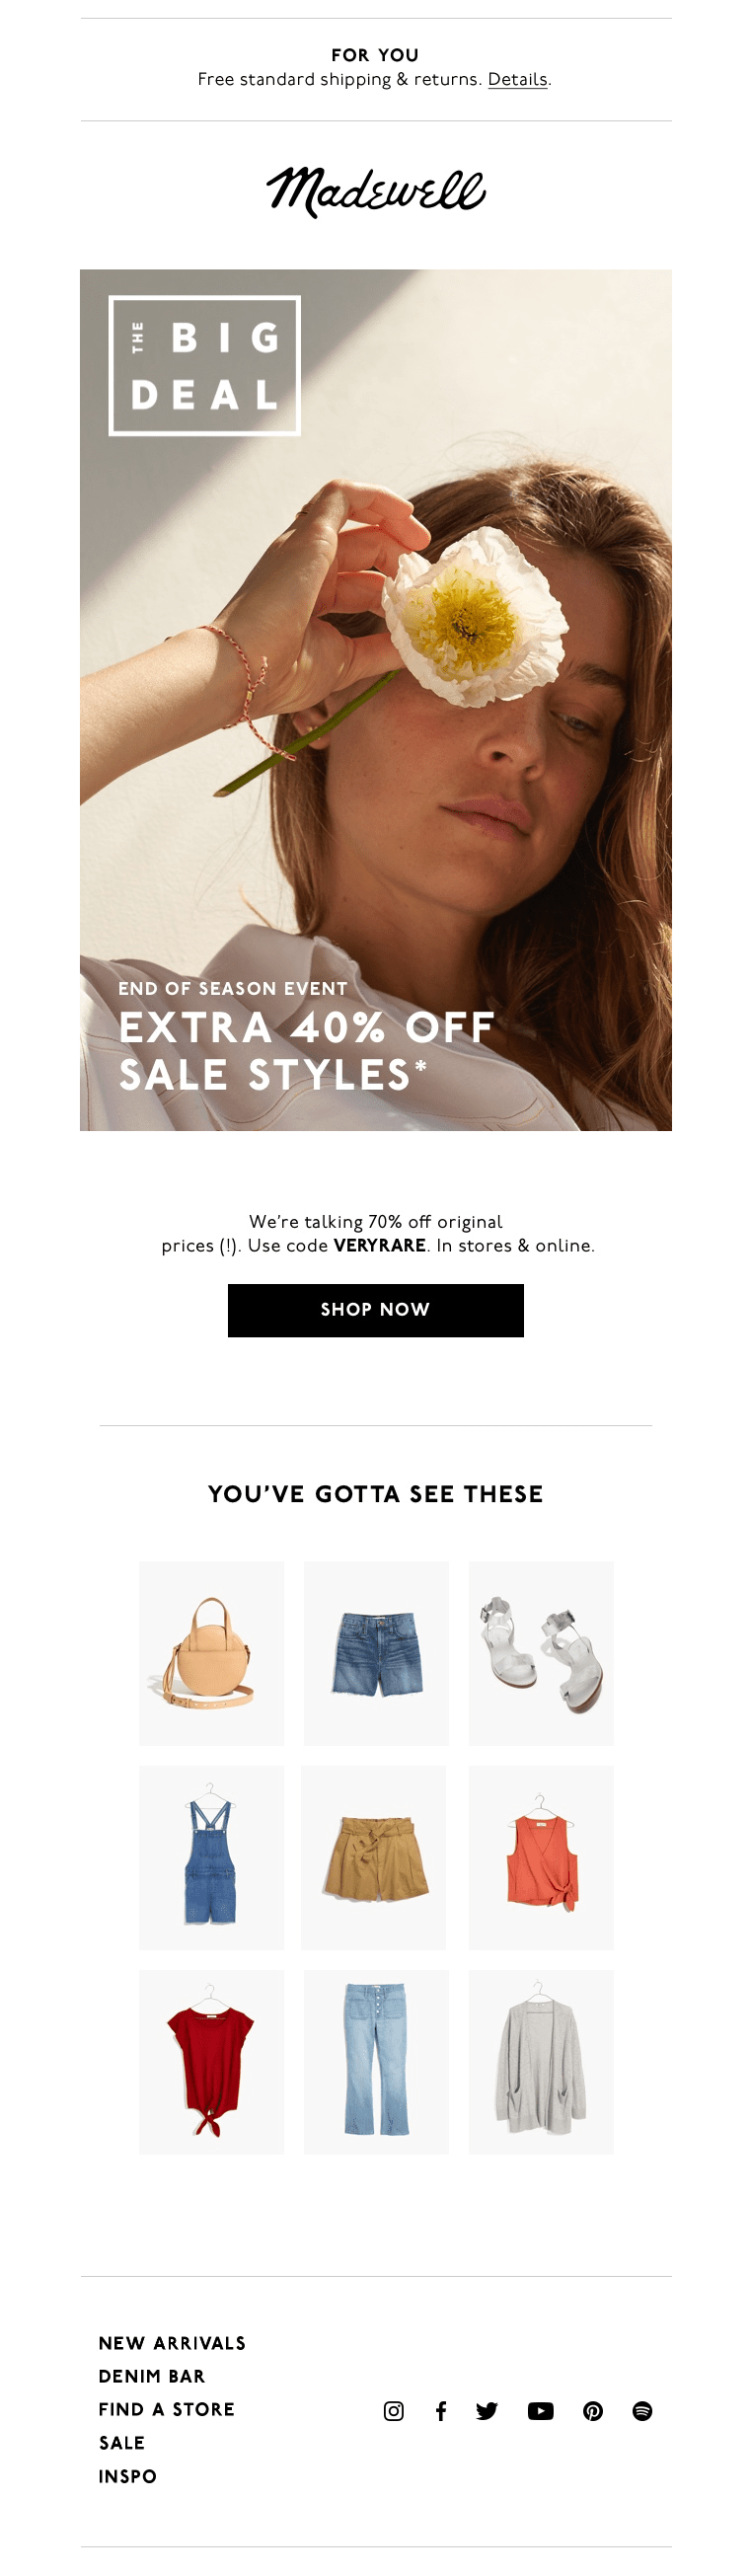 Sales email from Madewell